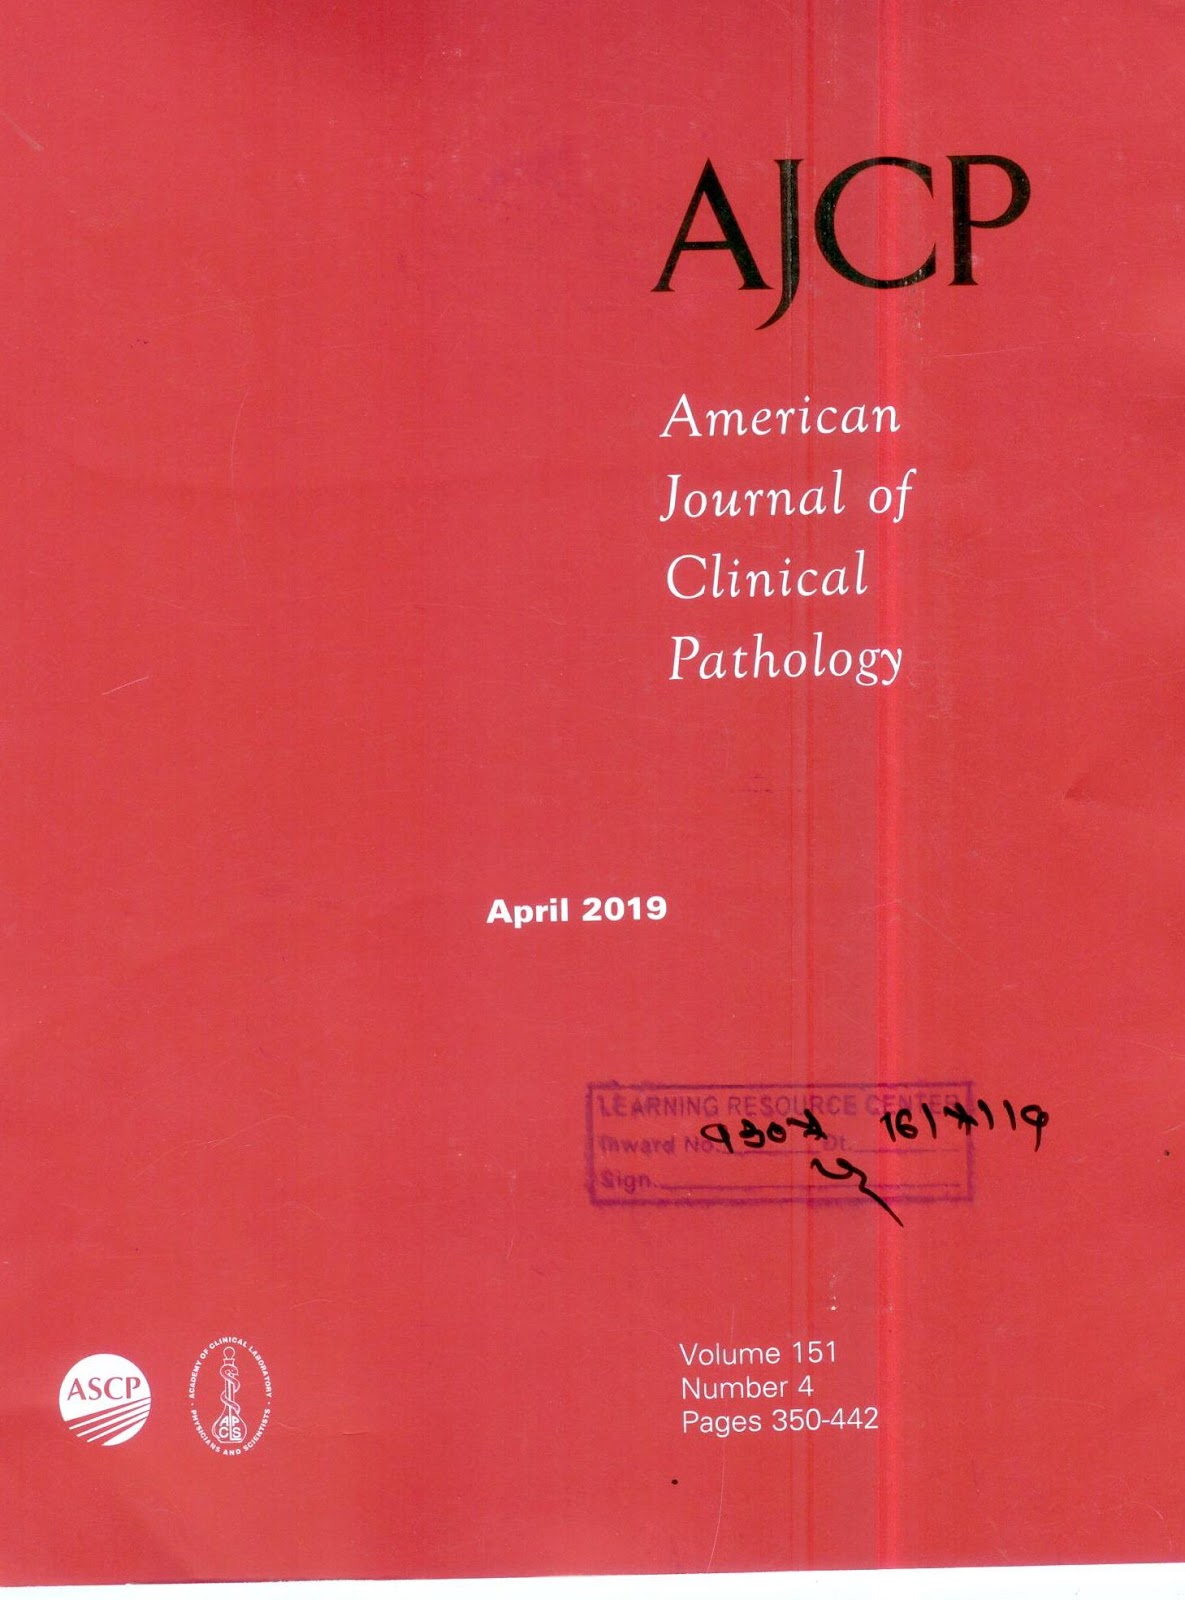 https://academic.oup.com/ajcp/issue/151/4